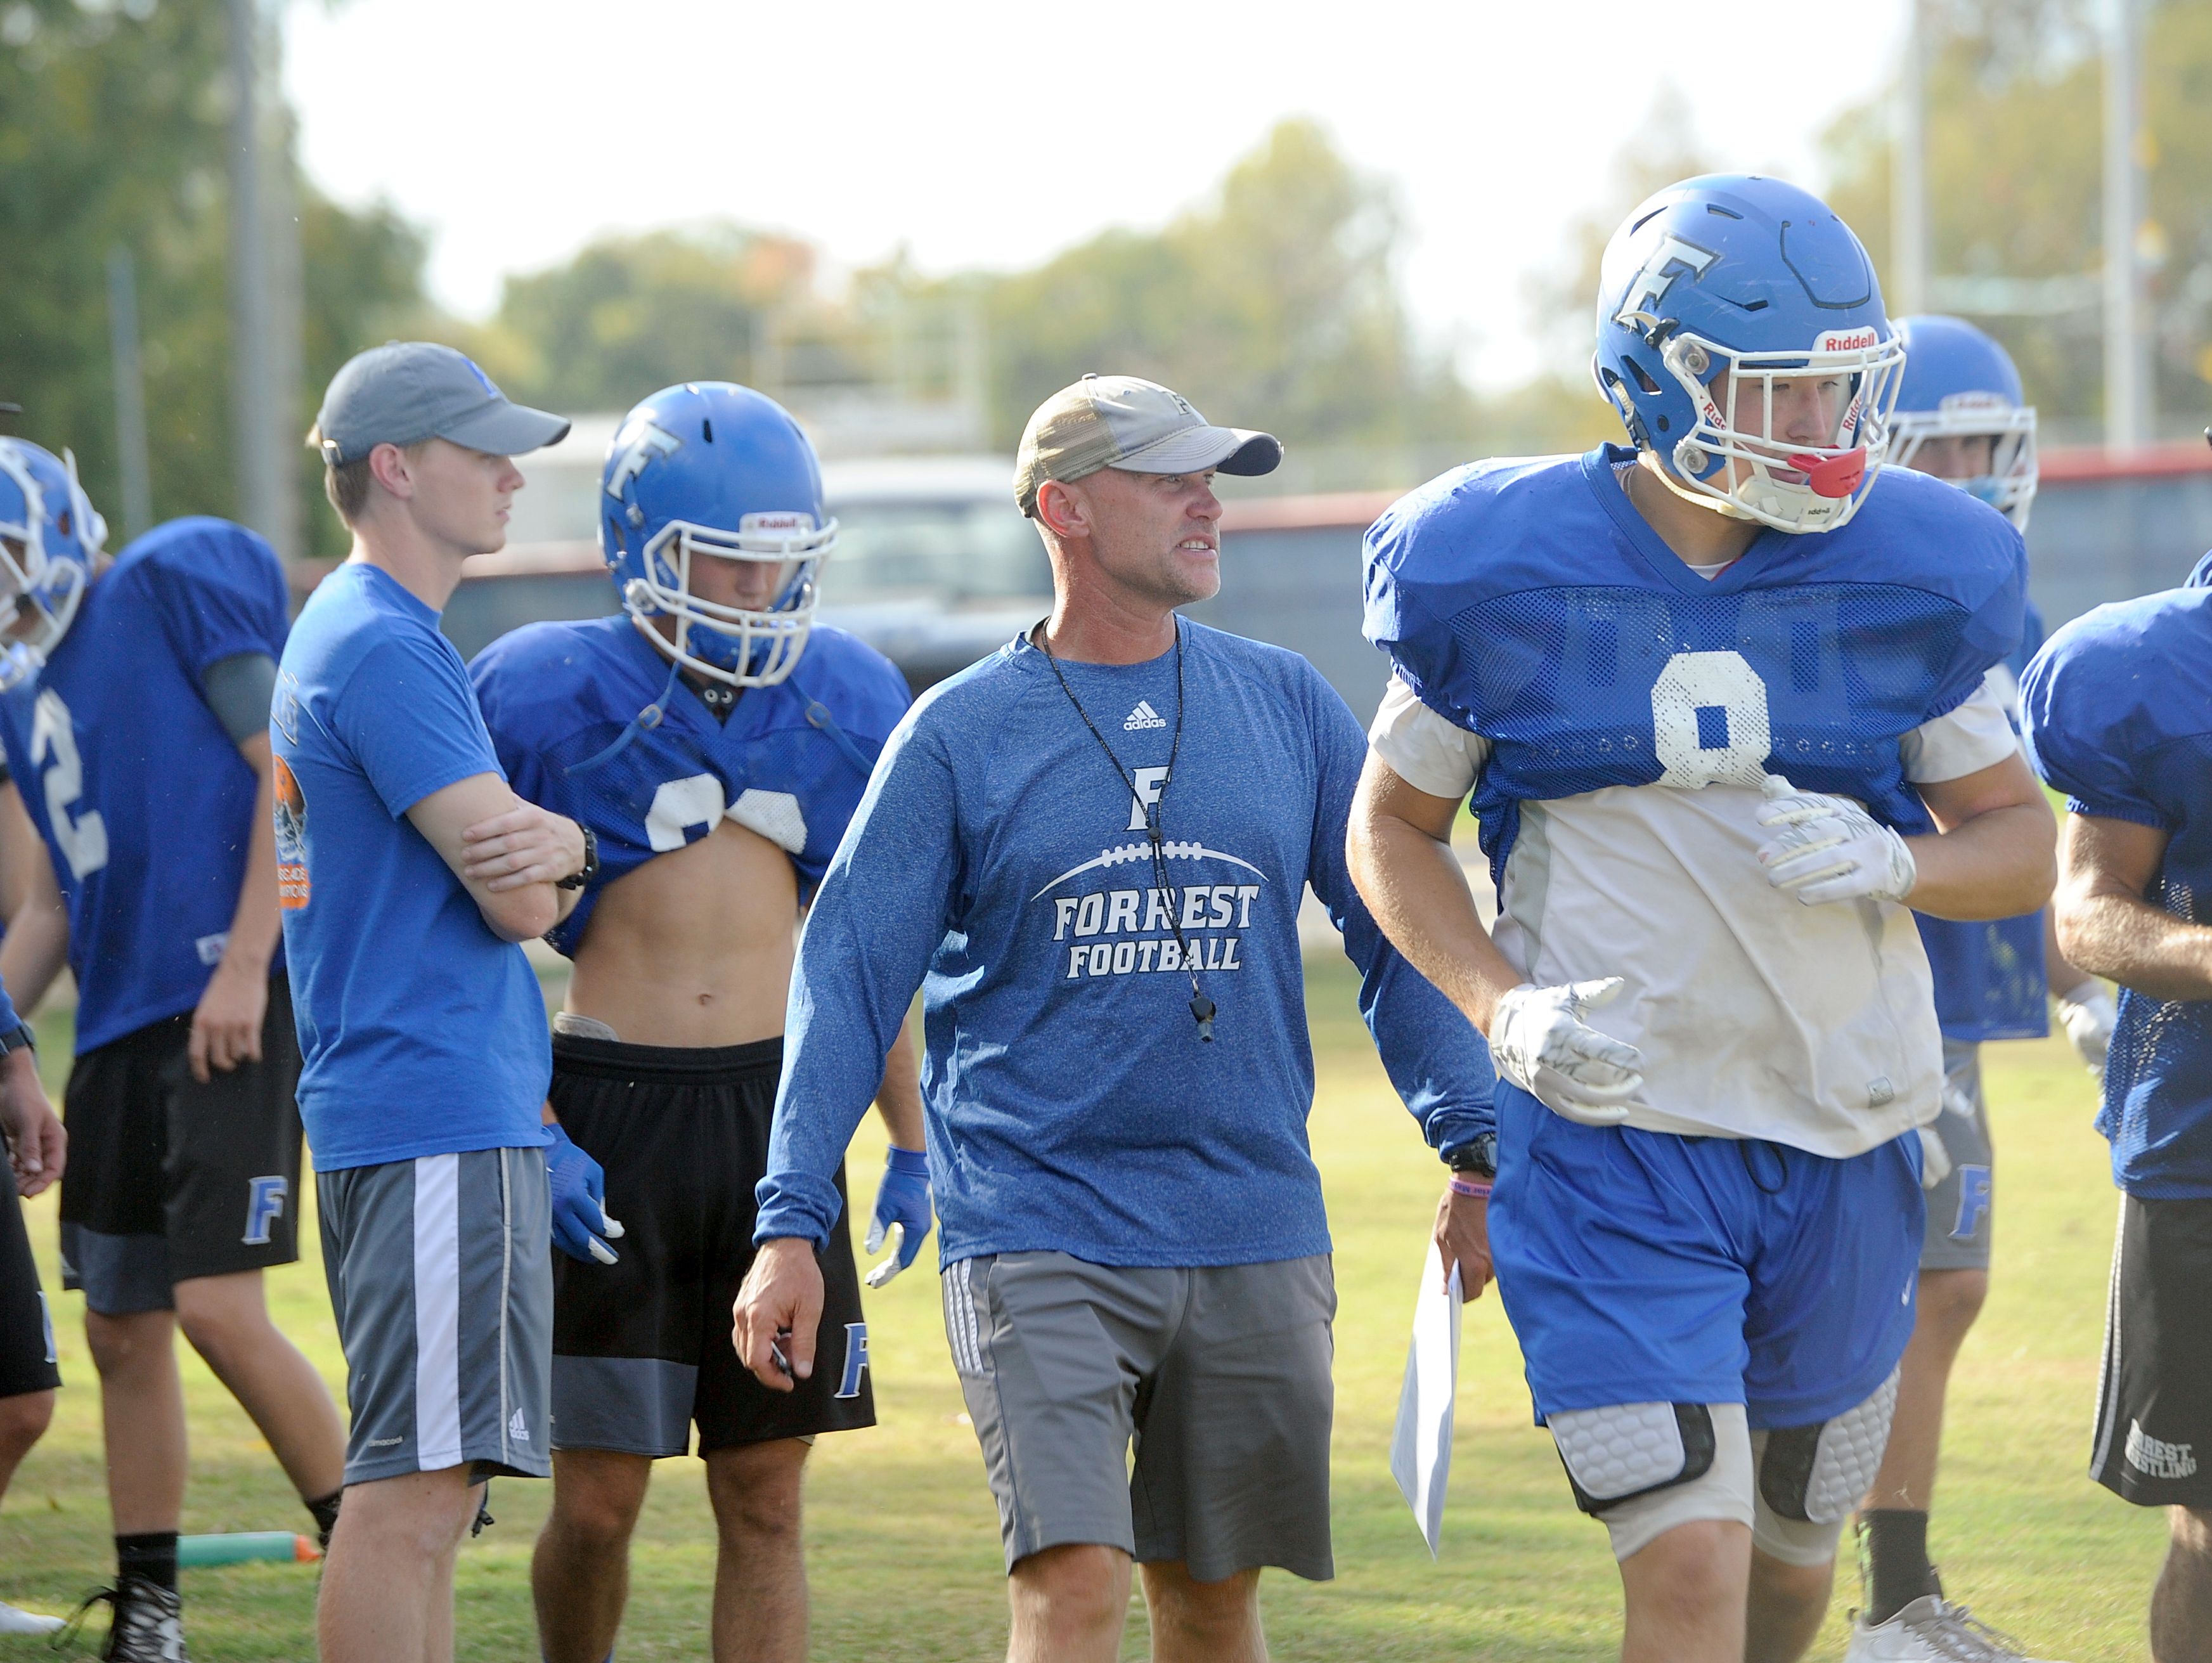 Forrest football coach Brent Johns has the Rockets out to a 9-0 start.